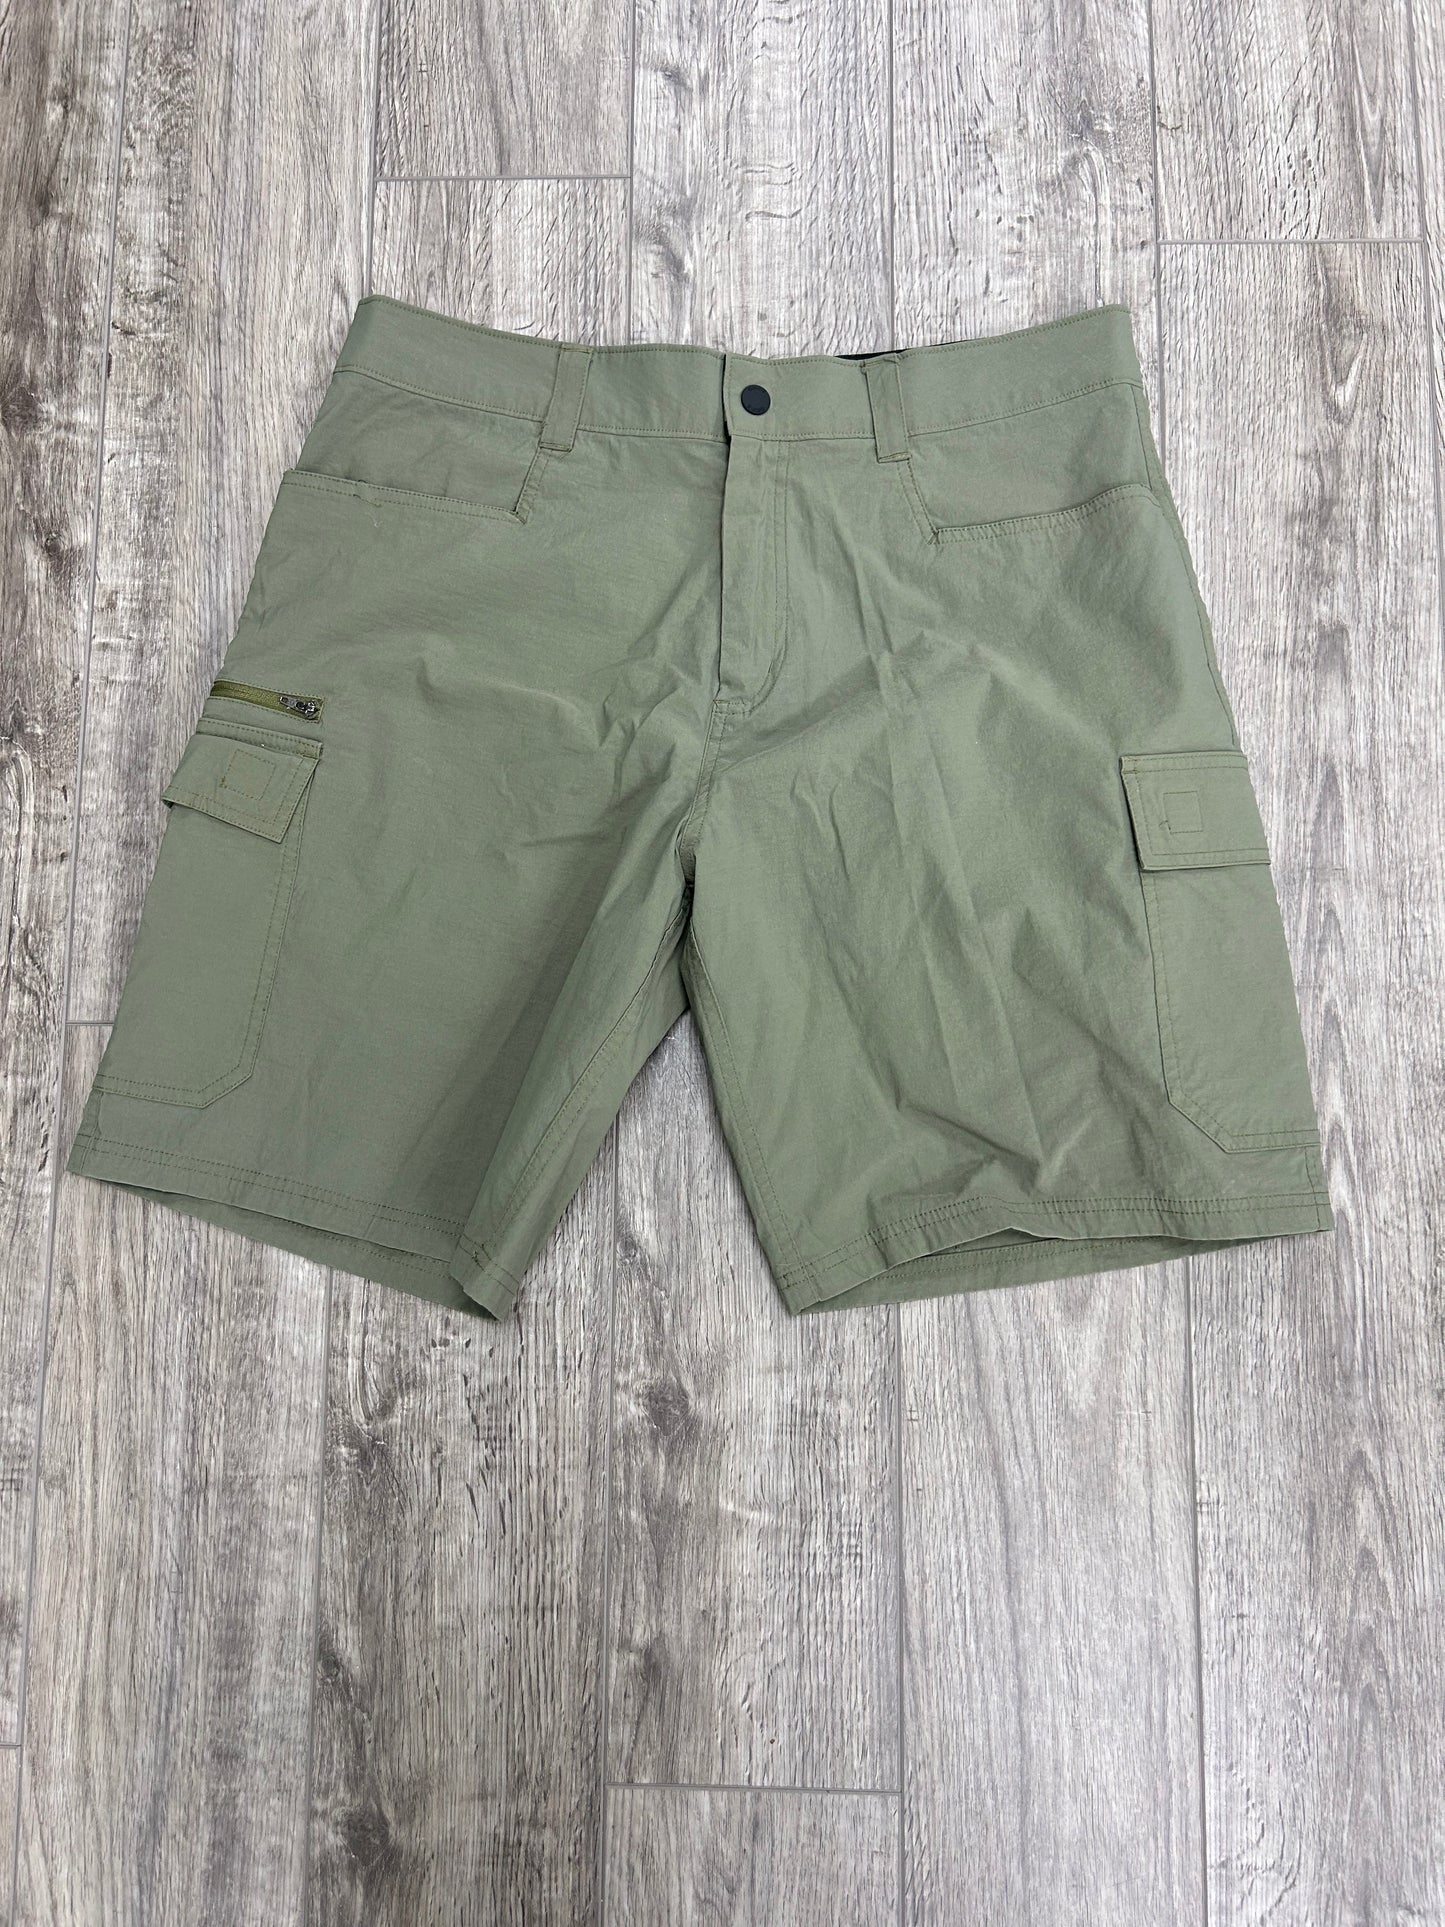 Orvis Olive Green Shorts Size 34